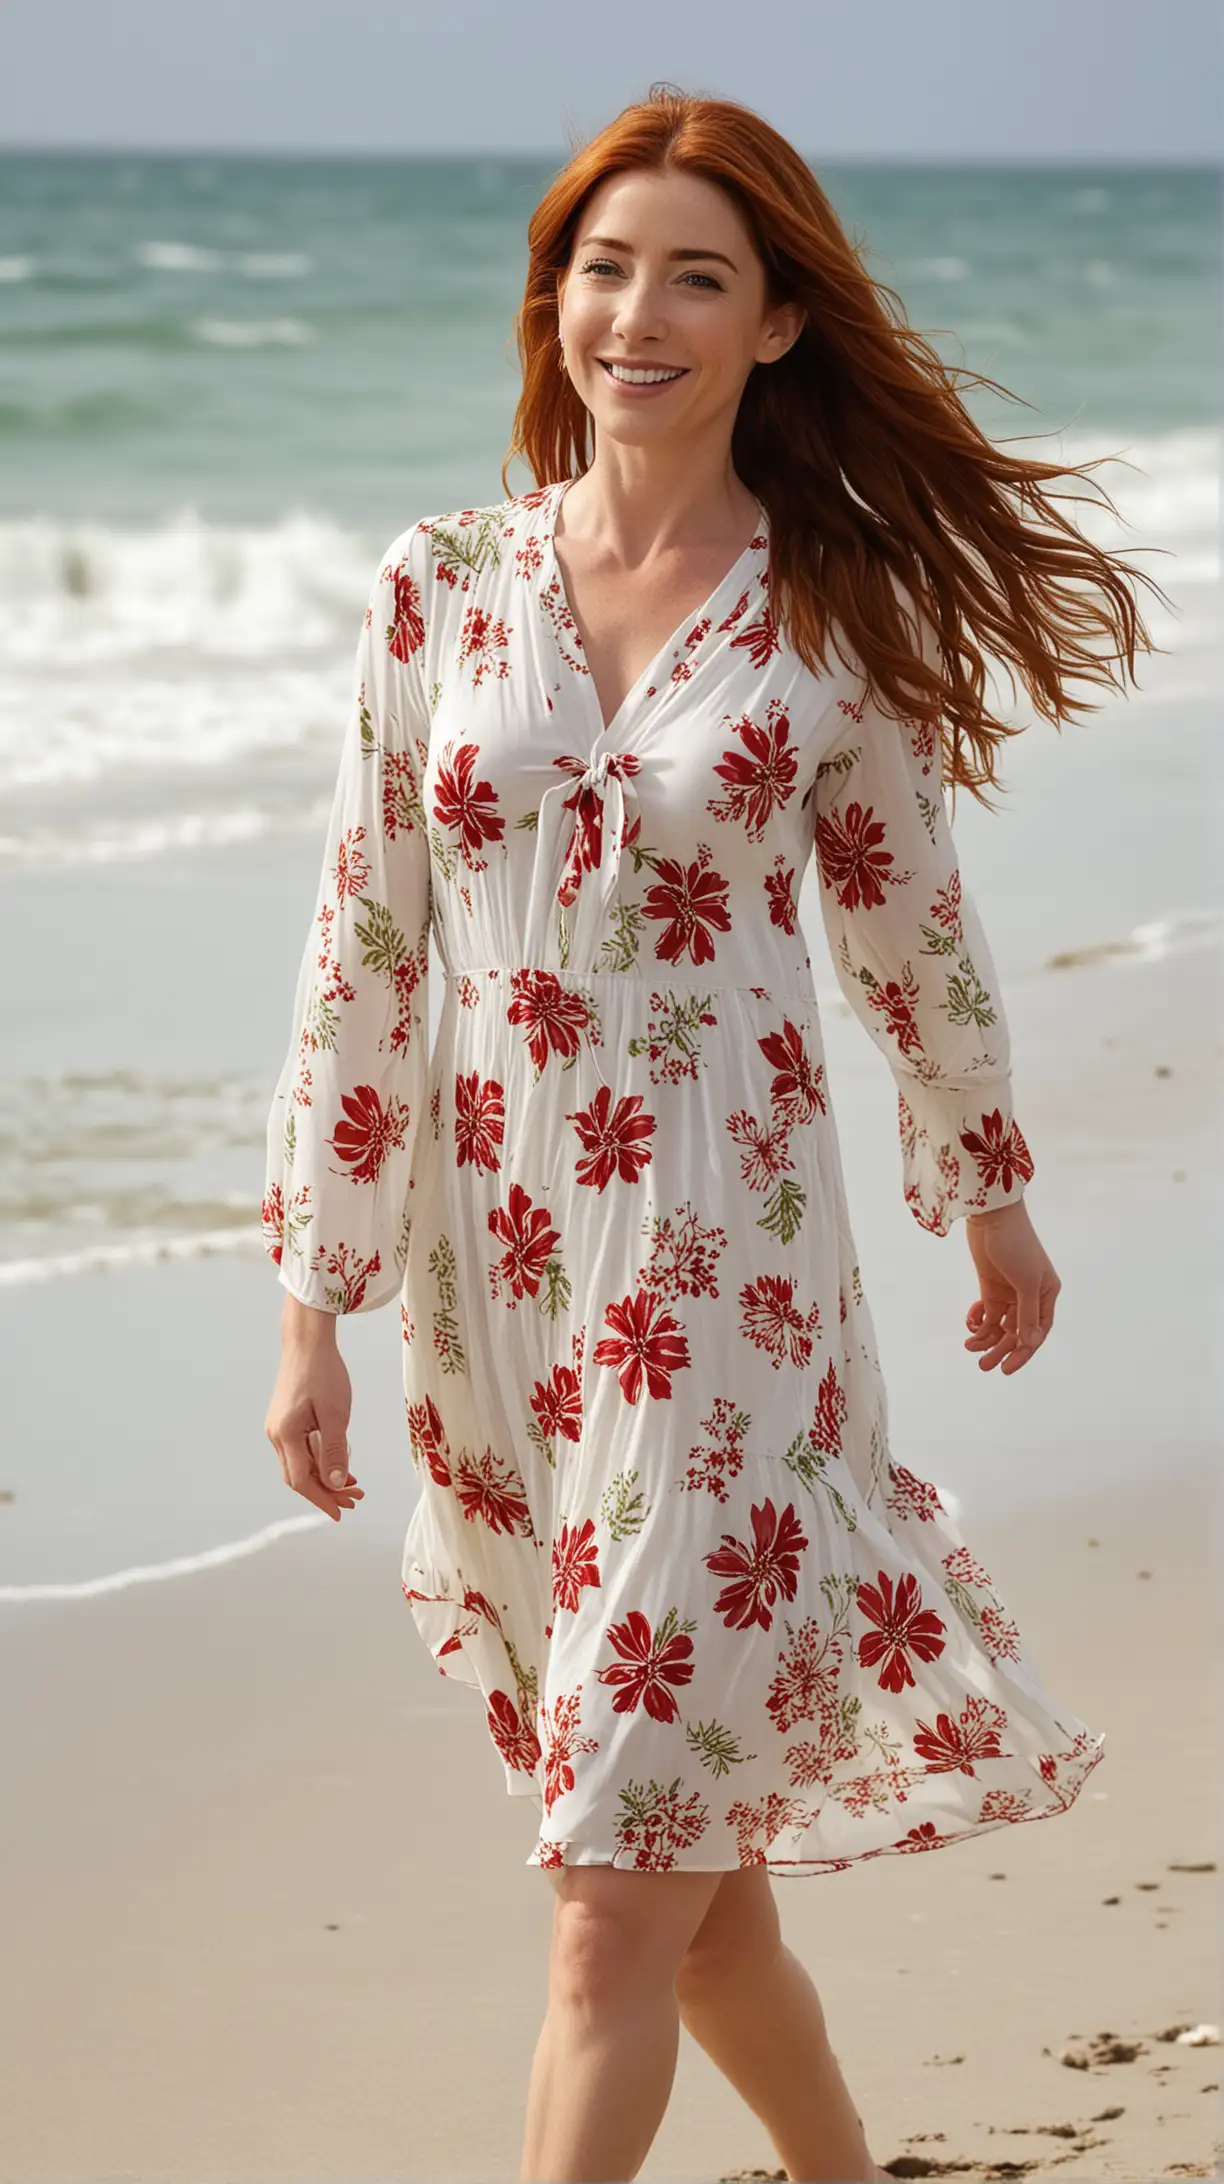 A slim realistic, Alyson hannigan cheveux longs roux clair, regarde amoureusement sourire rafraîchissant wearing a 2 piece white tropical dress with a red flower in her long hair walking at the beach showing a full body shot from the top of his head to his feet